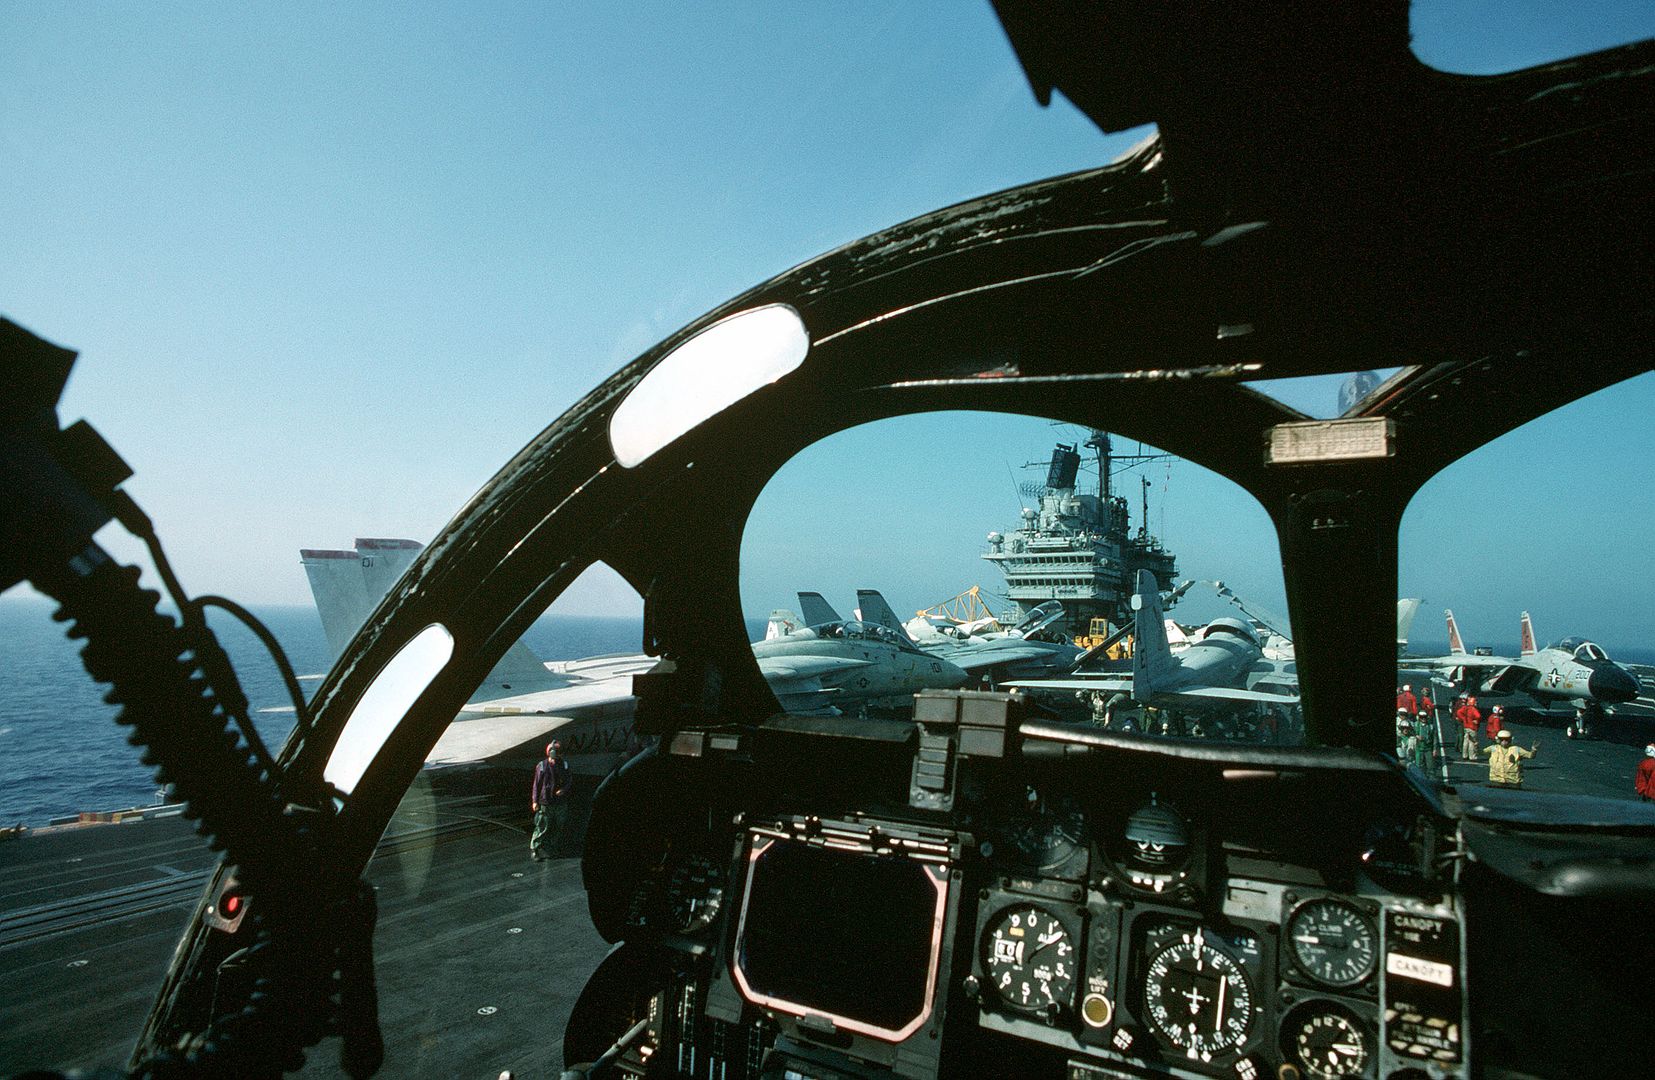 As Seen From The Cockpit Of An Attack Squadron 176 KA 6D Intruder Aircraft A Plane Director Guides A Pilot Across The Crowded Flight Deck Of The Aircraft Carrier USS FORRESTAL